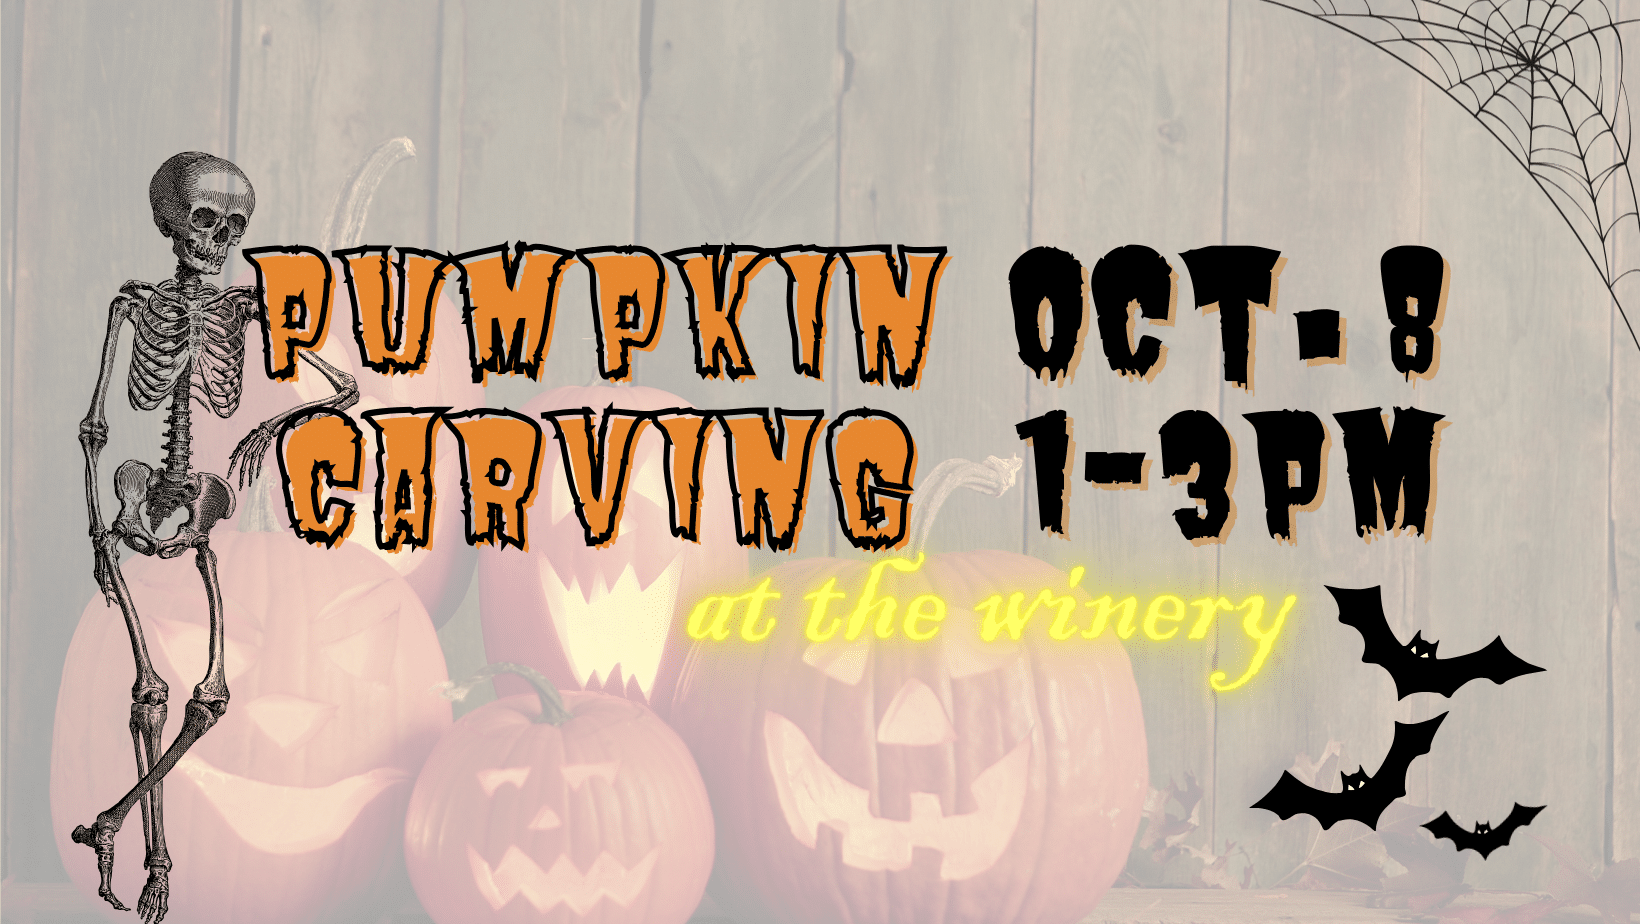 Pumpkin carving or painting at soldier creek winery on october 8 from 1-3pm. pre-registration required.